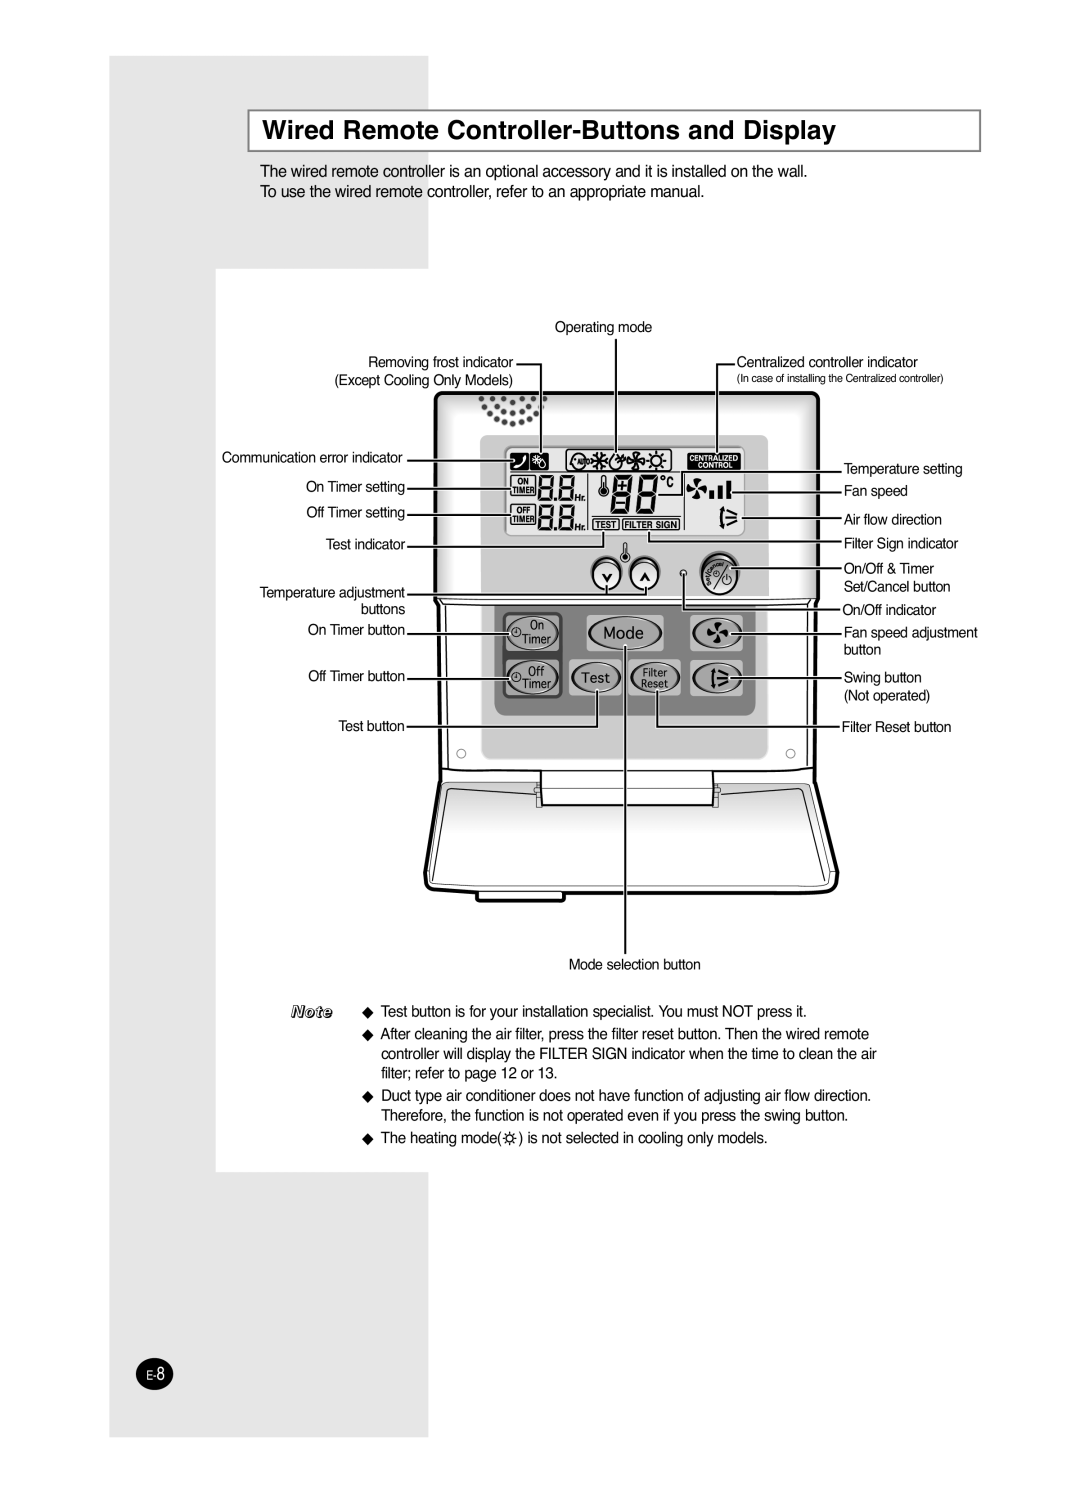 Samsung AVMDH(C) user manual Wired Remote Controller-Buttonsand Display 